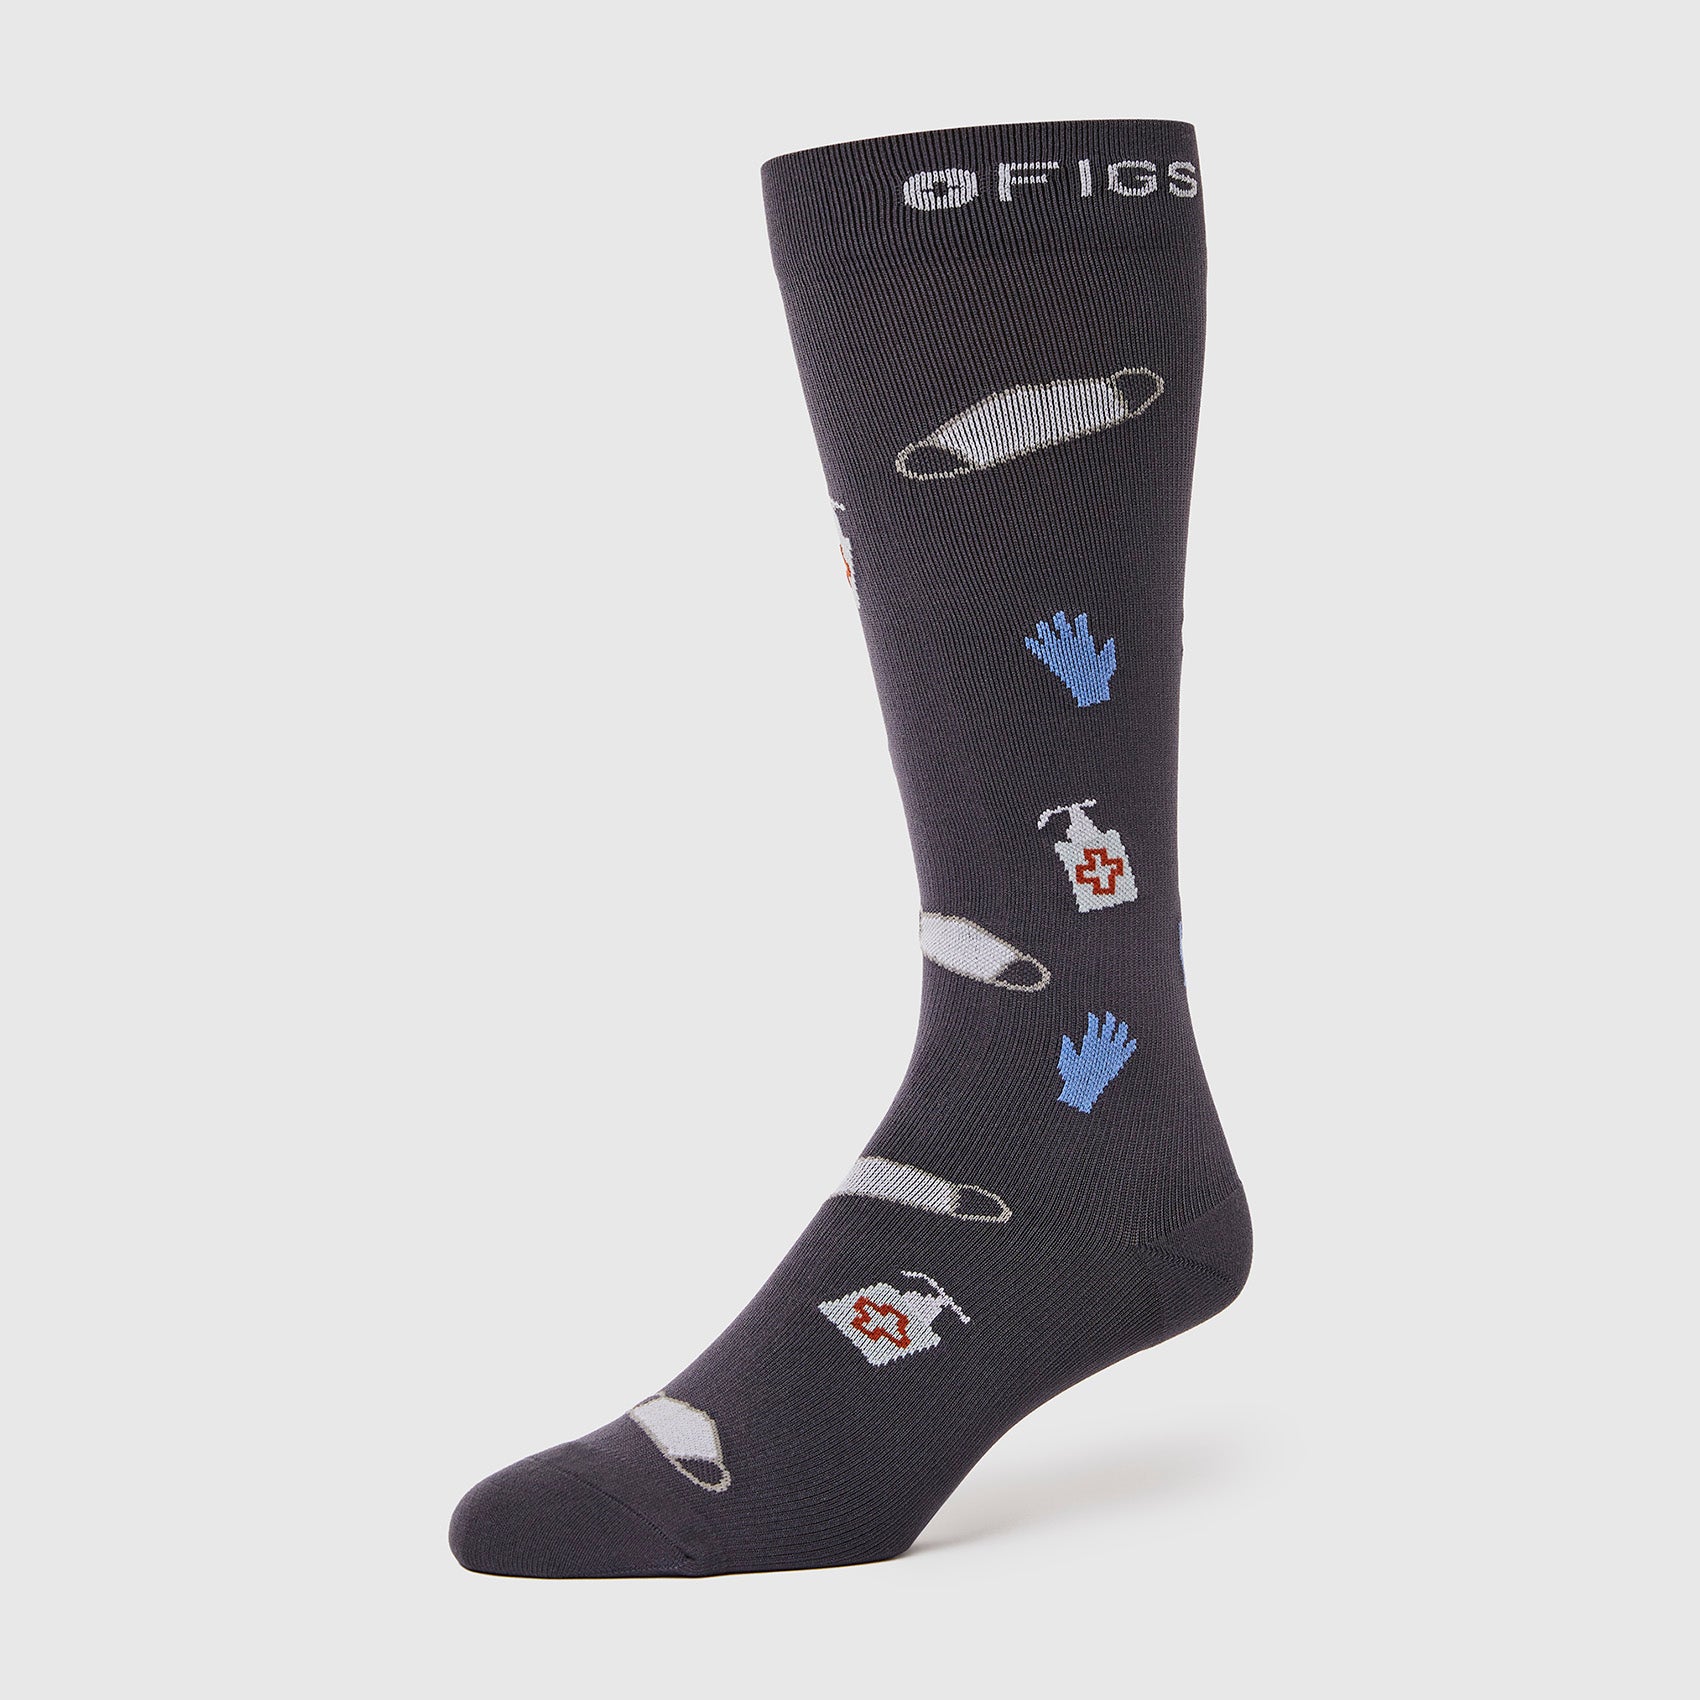 https://cdn.shopify.com/s/files/1/0139/8942/products/Q4_2022_10_CHARCOAL_NOT-GOING-VIRAL-COMPRESSION-SOCKS_M_GHOST_22019.jpg?v=1676513236